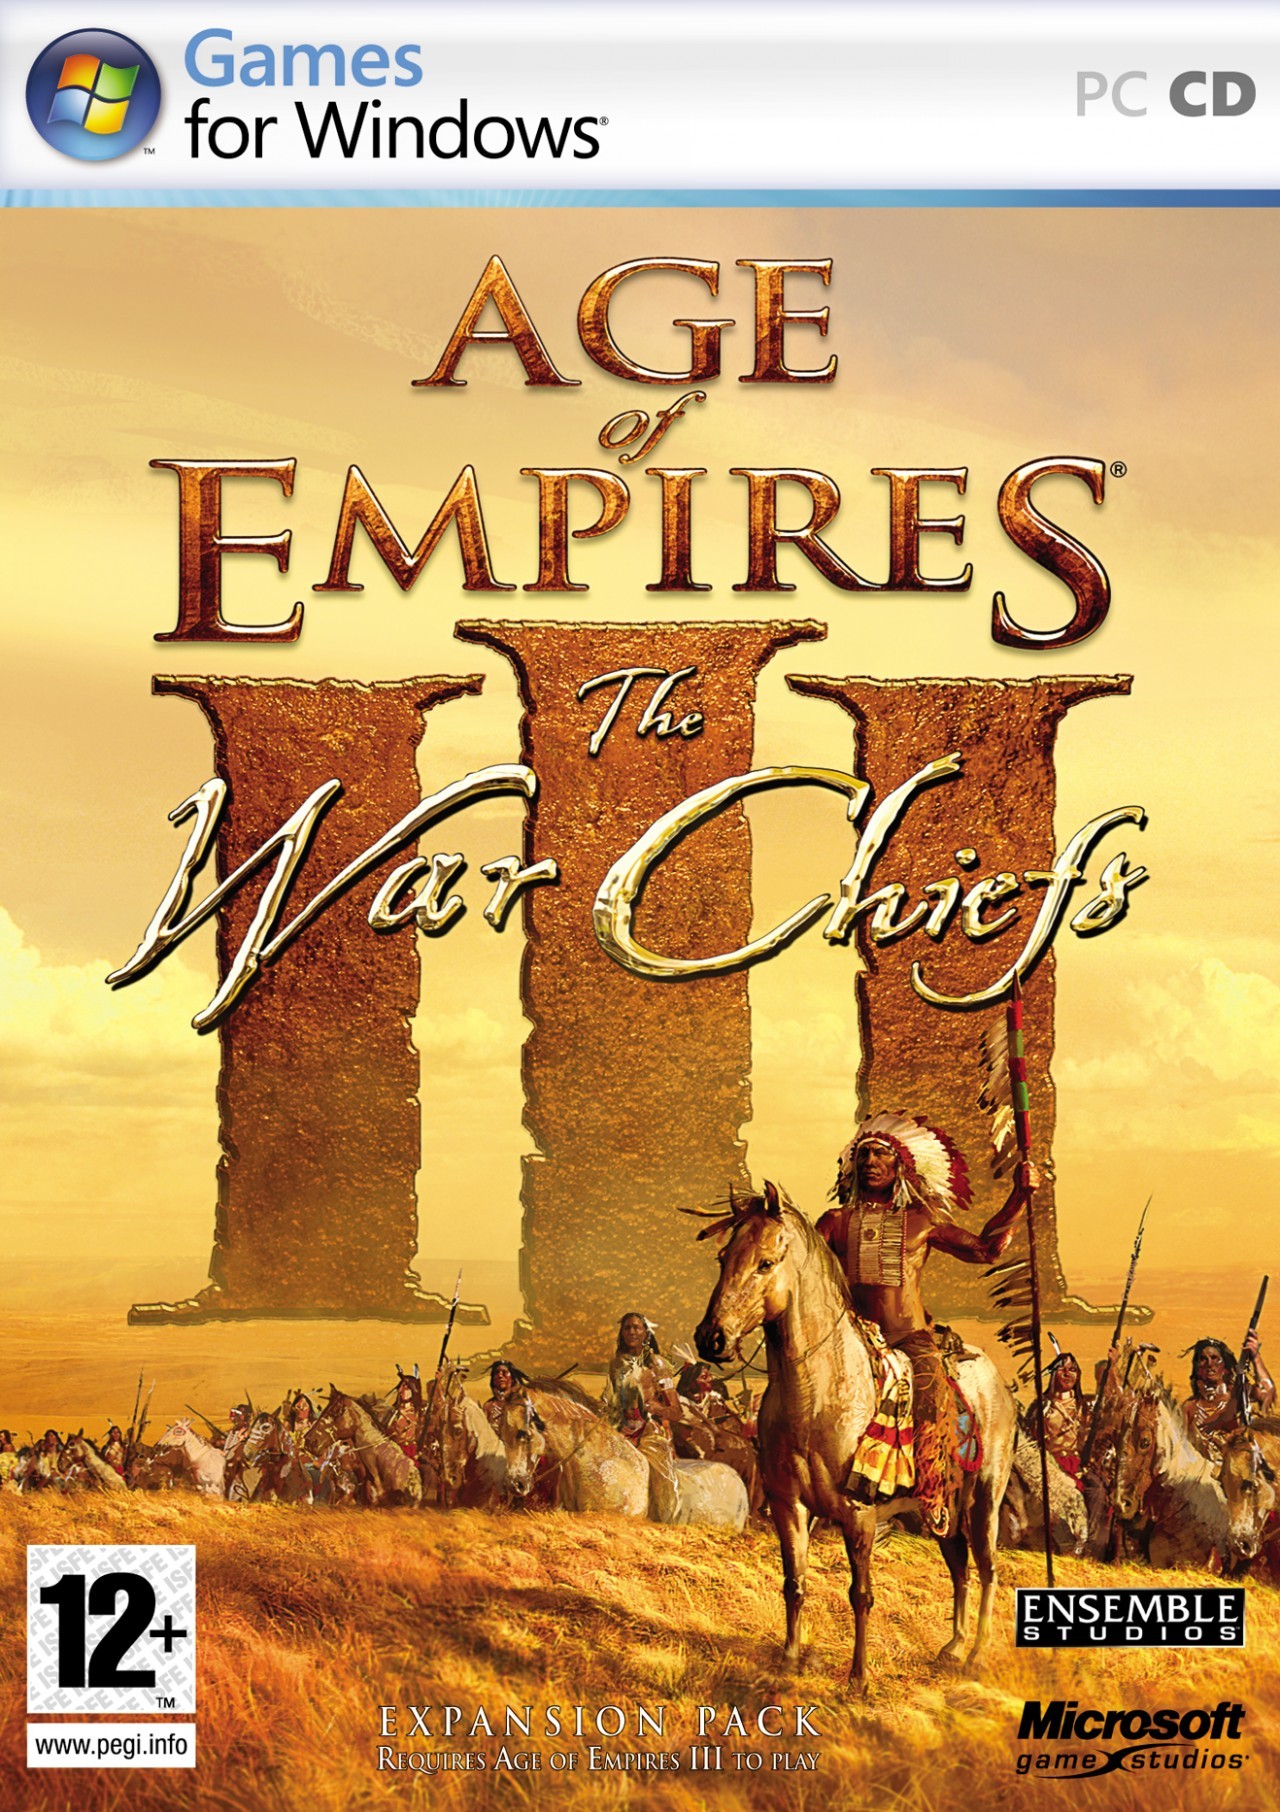 download age of empire 3 full version